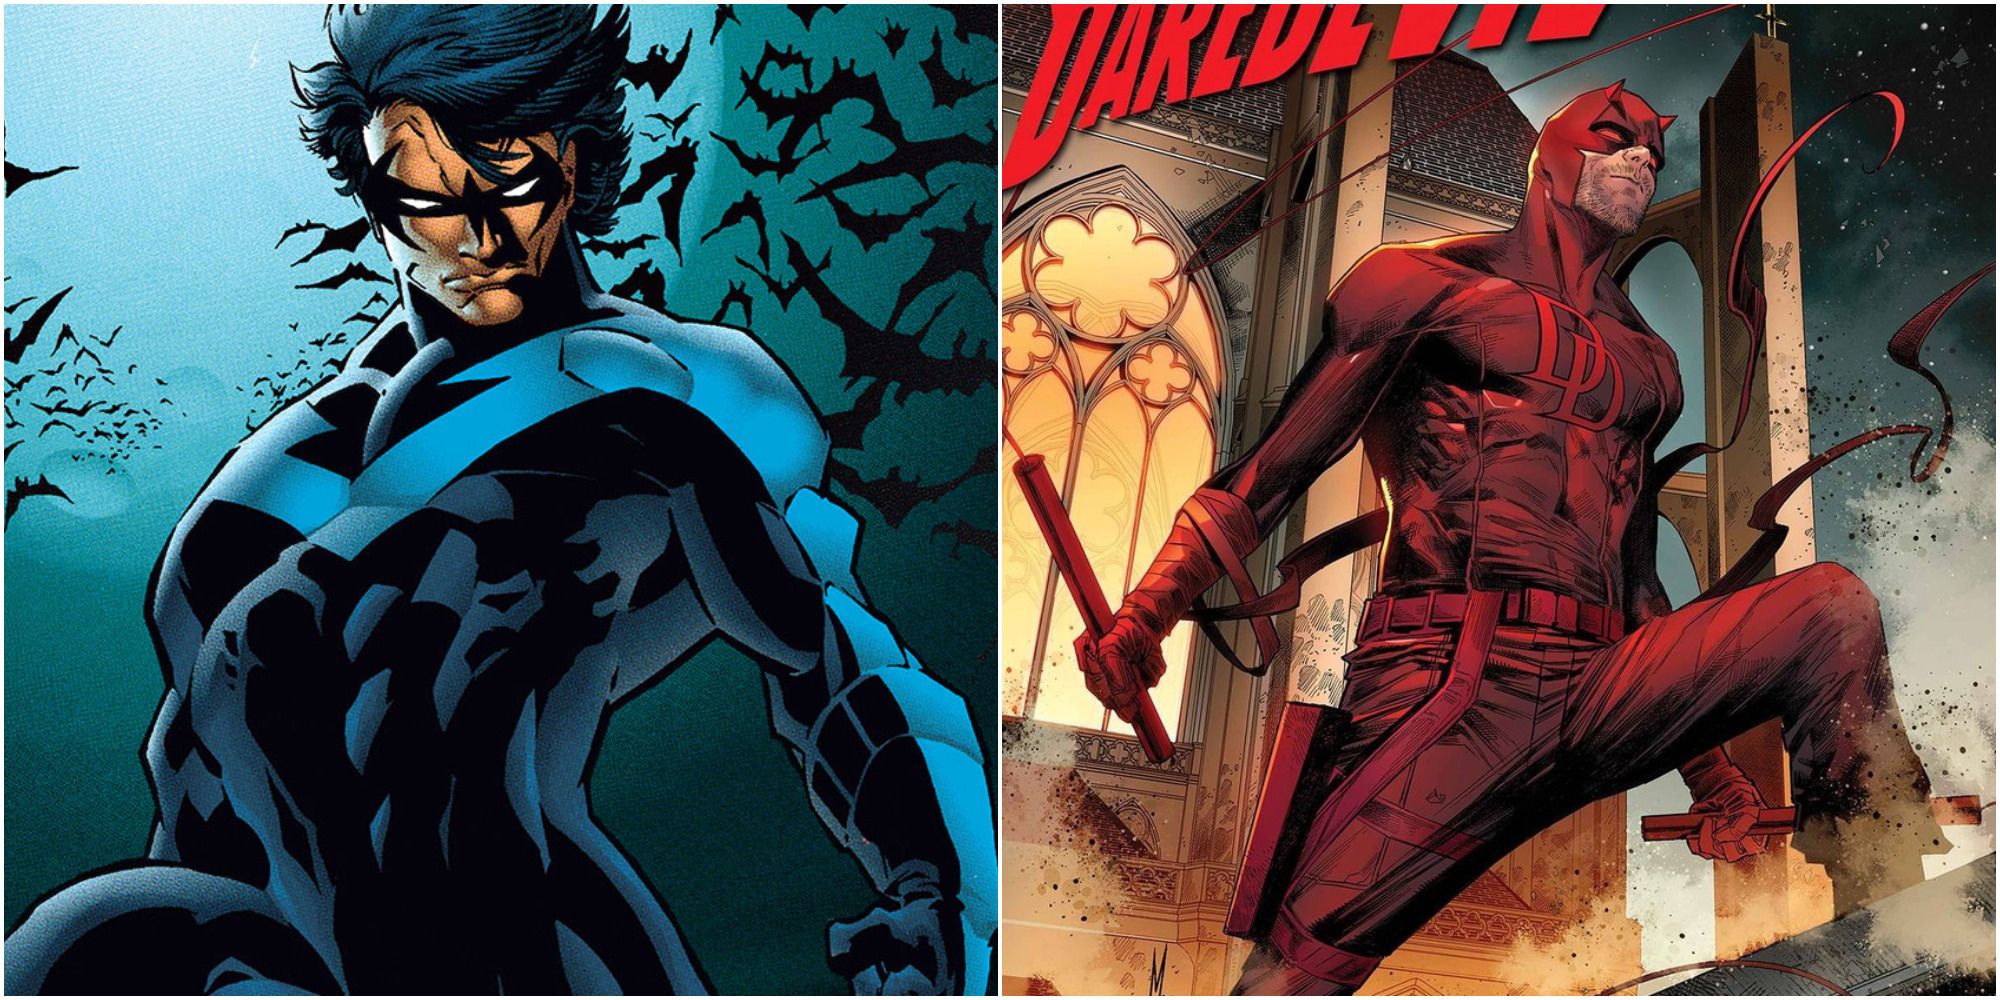 Nightwing and Daredevil